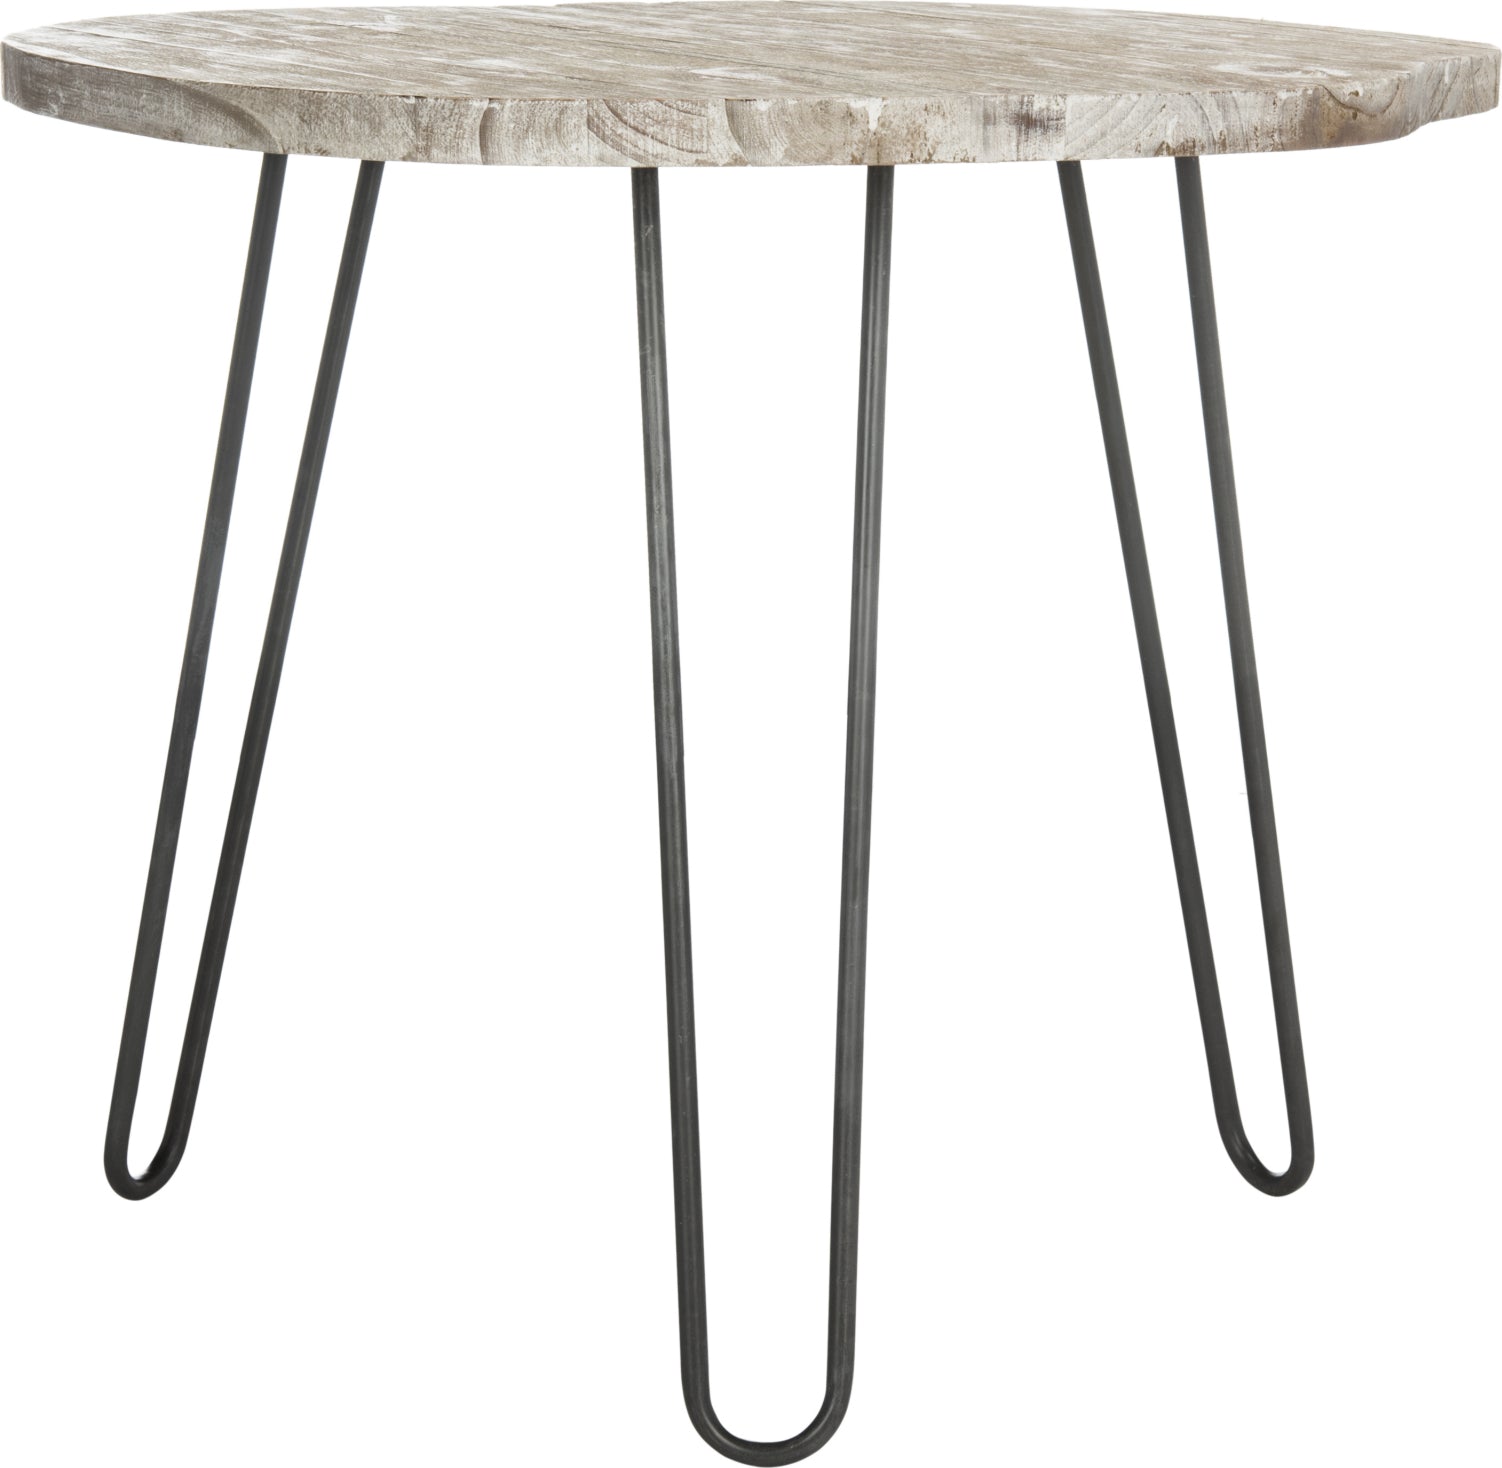 Safavieh Mindy Wood Top Dining Table Grey and White Wash Furniture main image